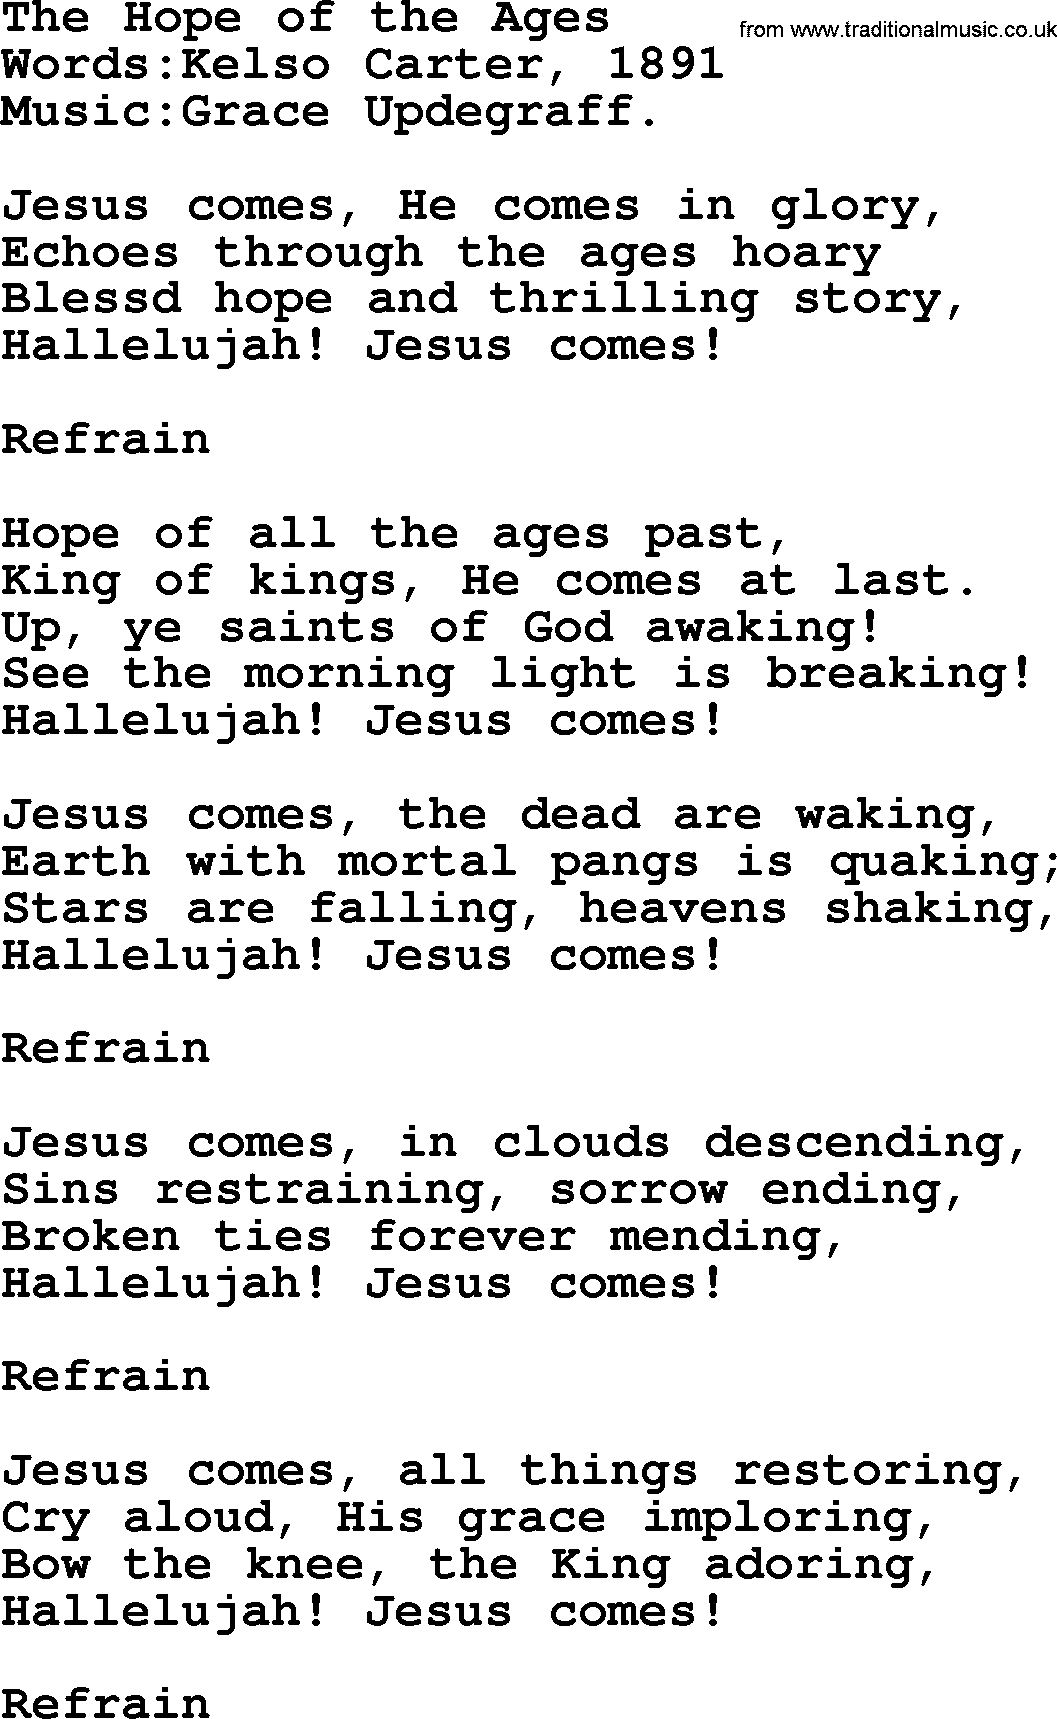 Christian hymns and songs about Jesus' Return(The Second Coming): The Hope Of The Ages, lyrics with PDF